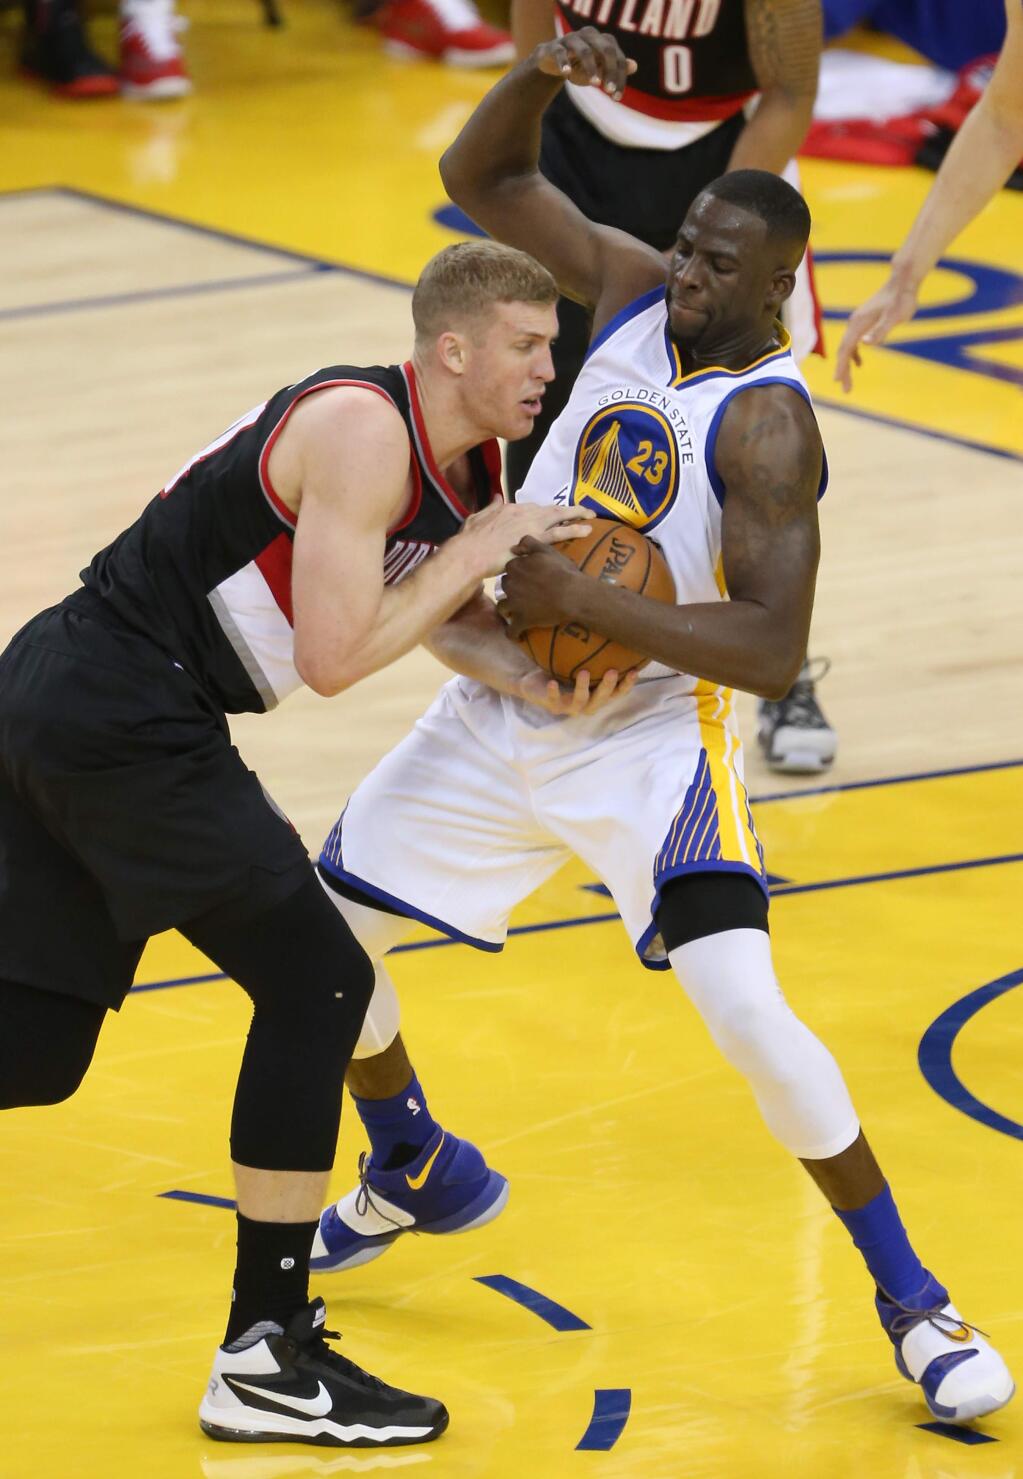 Golden State Warriors forward Draymond Green steals the ball away from Portland Trail Blazers center Mason Plumlee, during their game in Oakland on Sunday, May 1, 2016. The Warriors defeated the Trail Blazers 118-106. (Christopher Chung/ The Press Democrat)